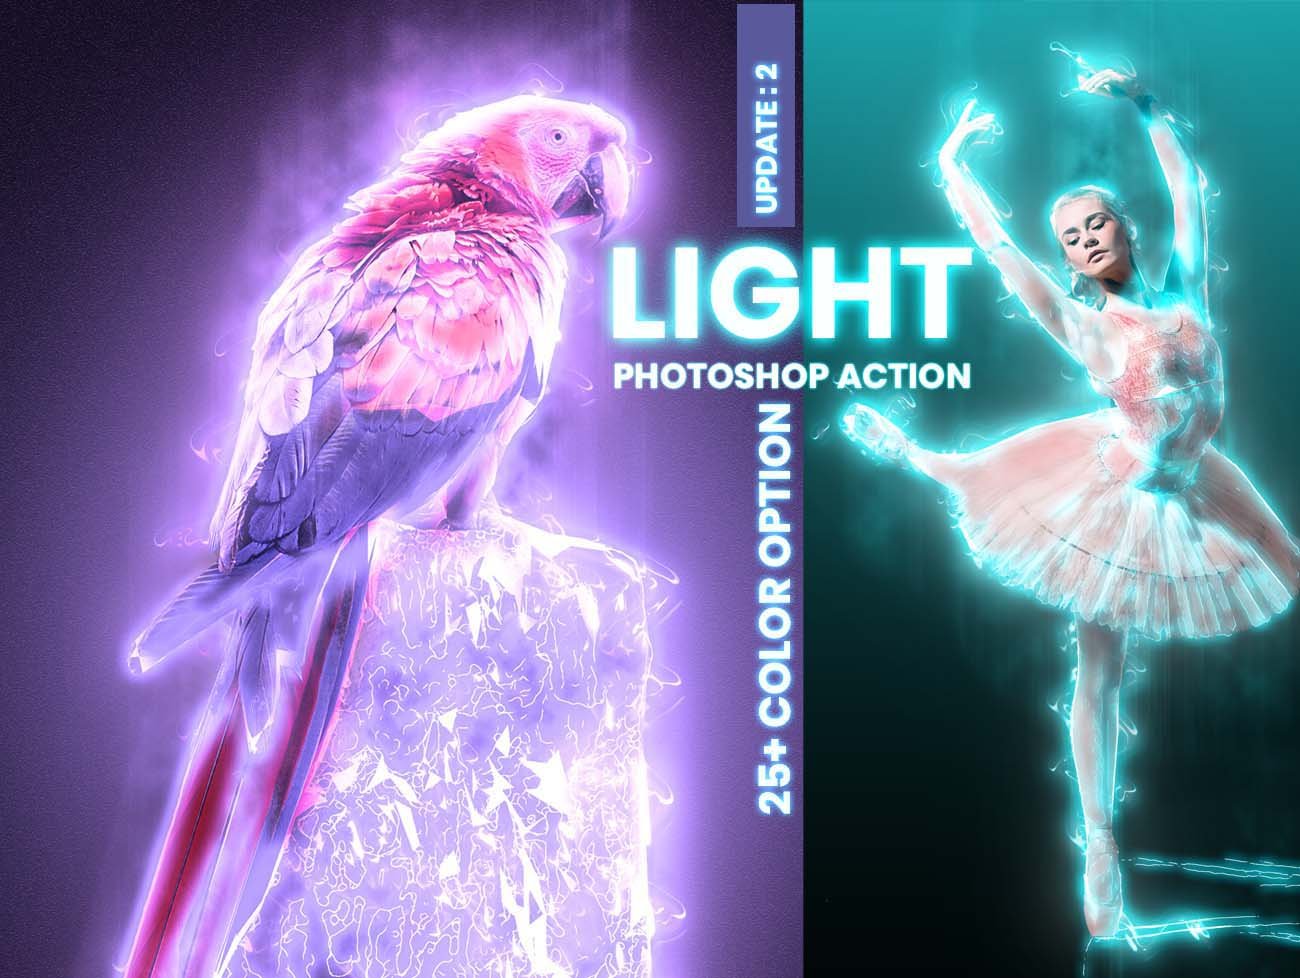 Light Photoshop Actioncover image.